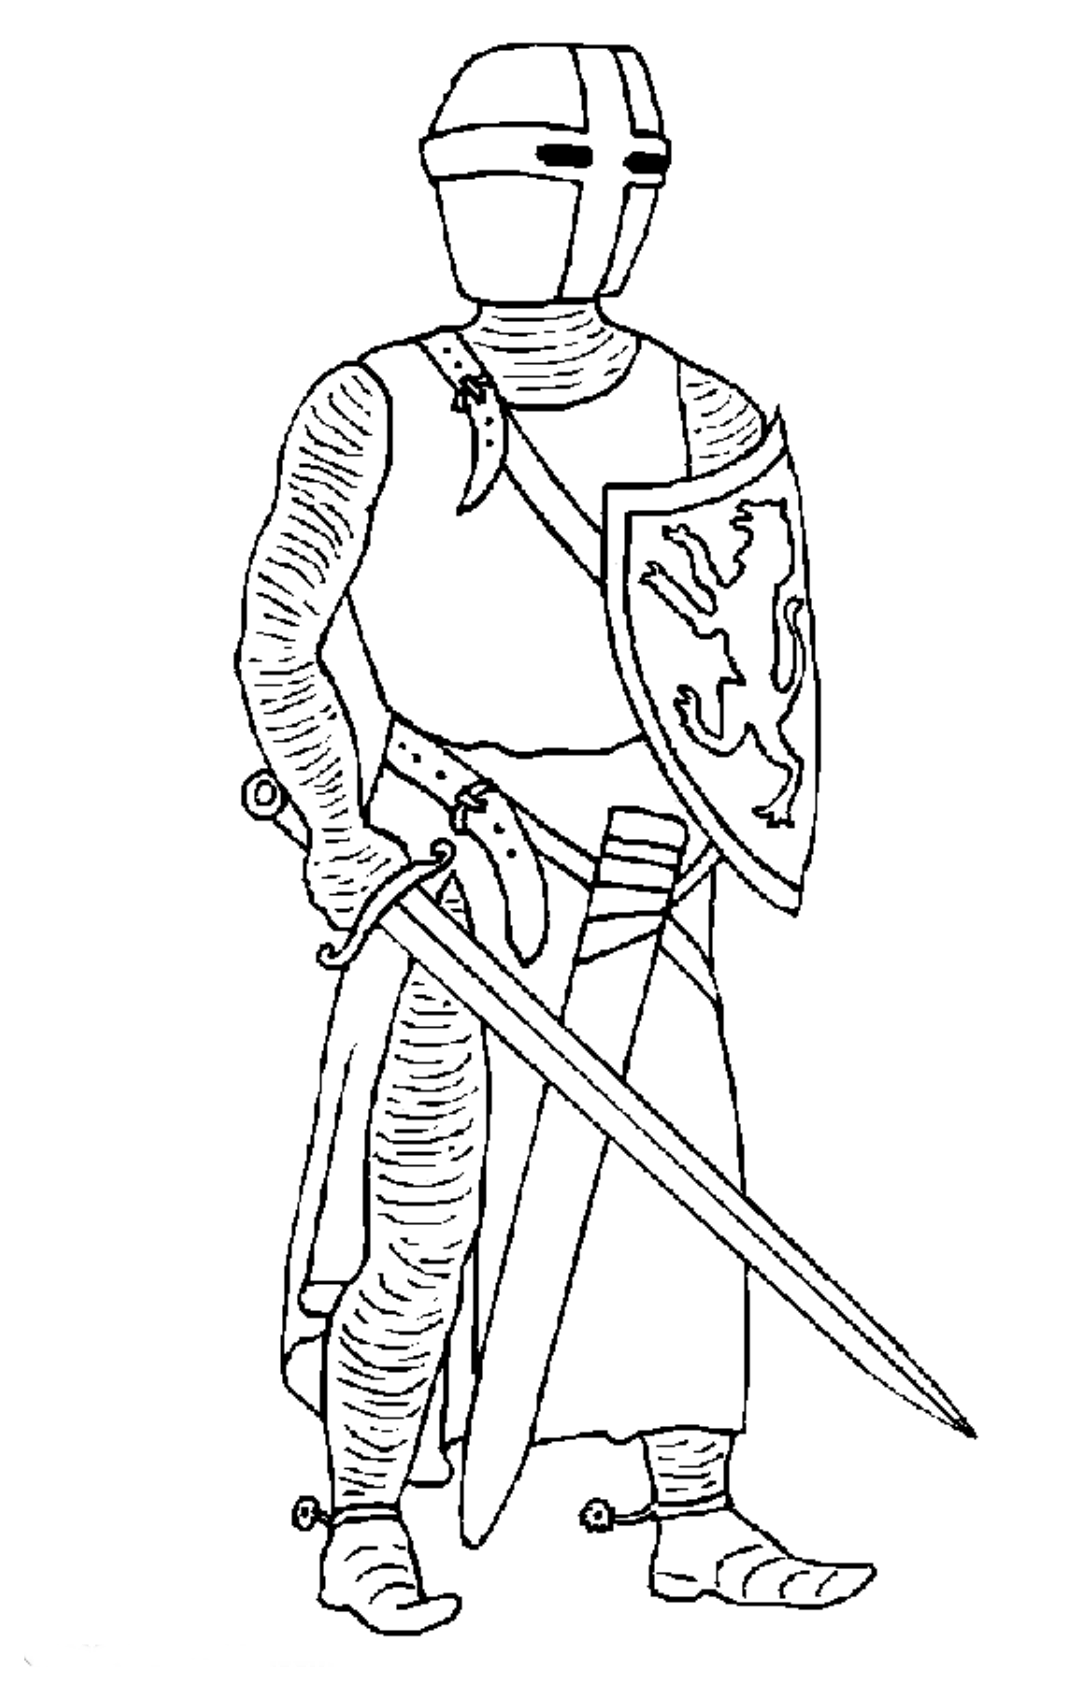 Kids-n-fun.com | Coloring page Knights Knights